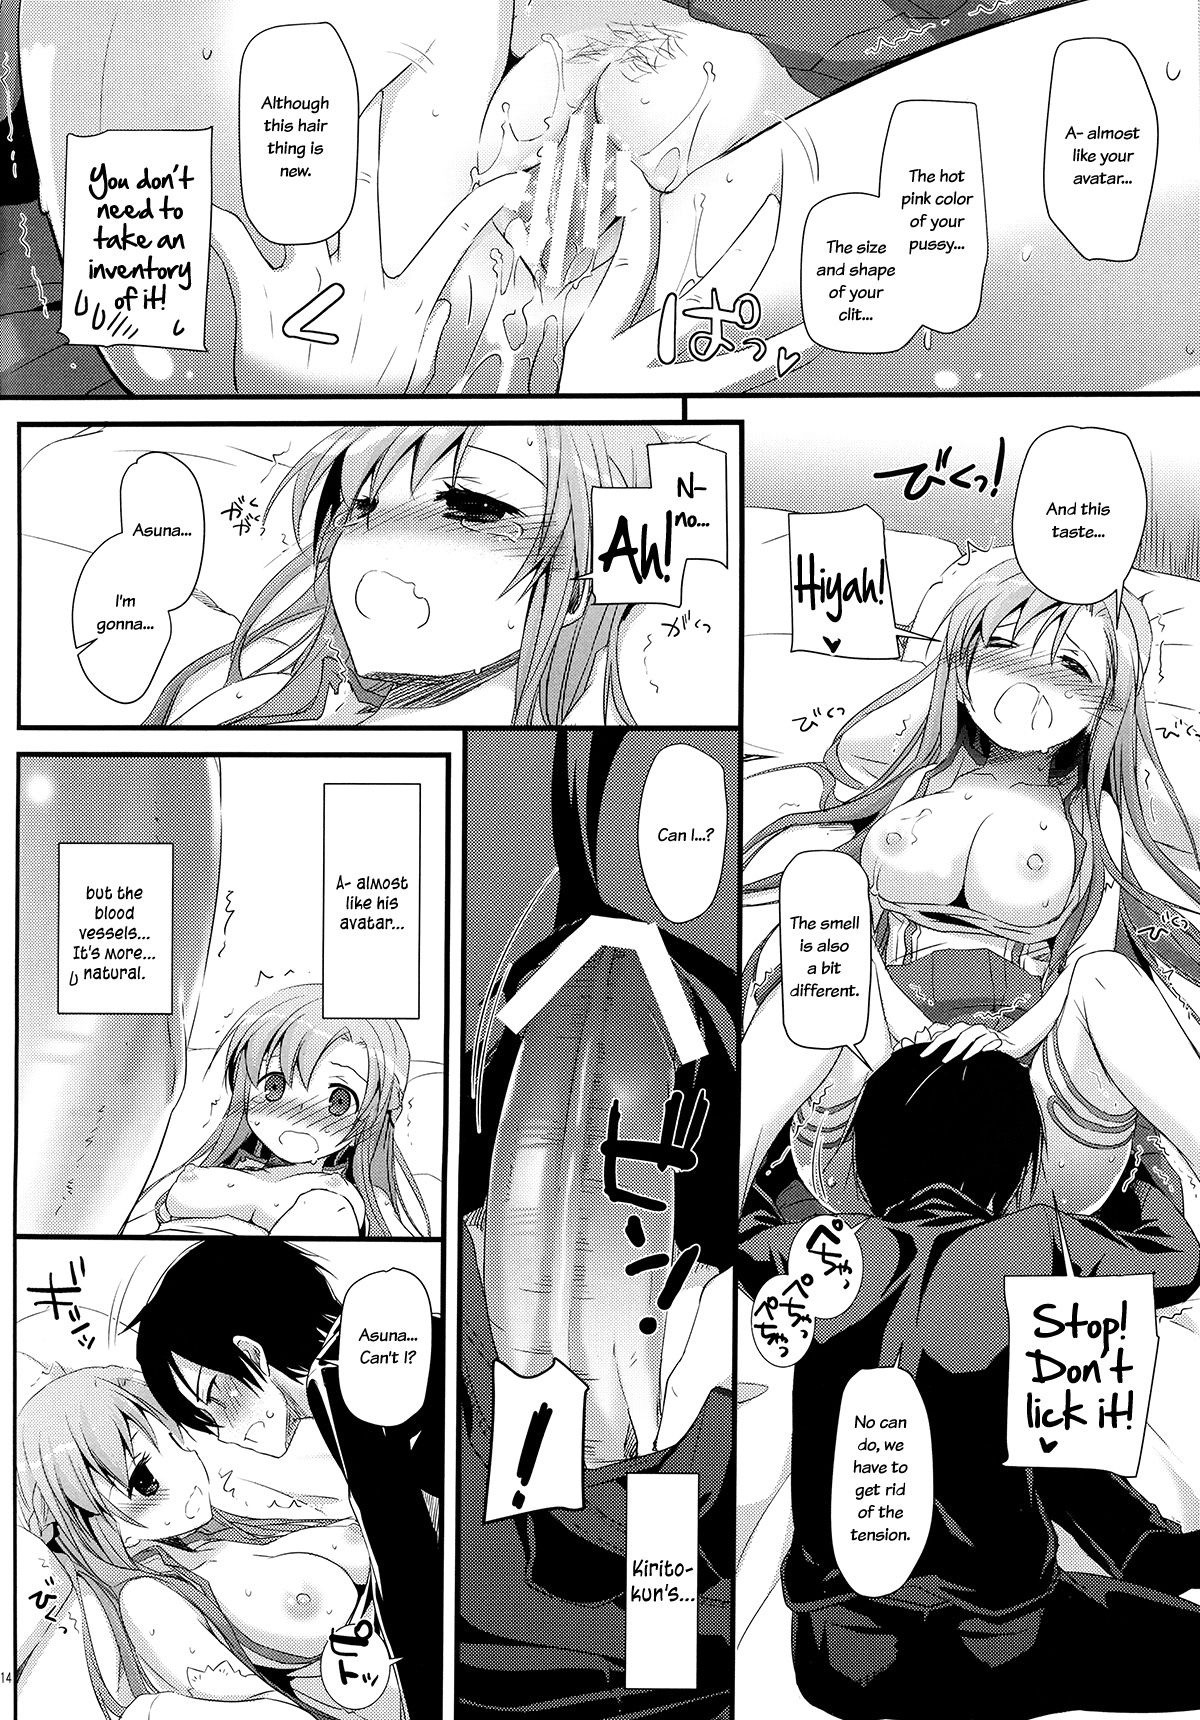 D.L. Action 70 hentai manga picture 13